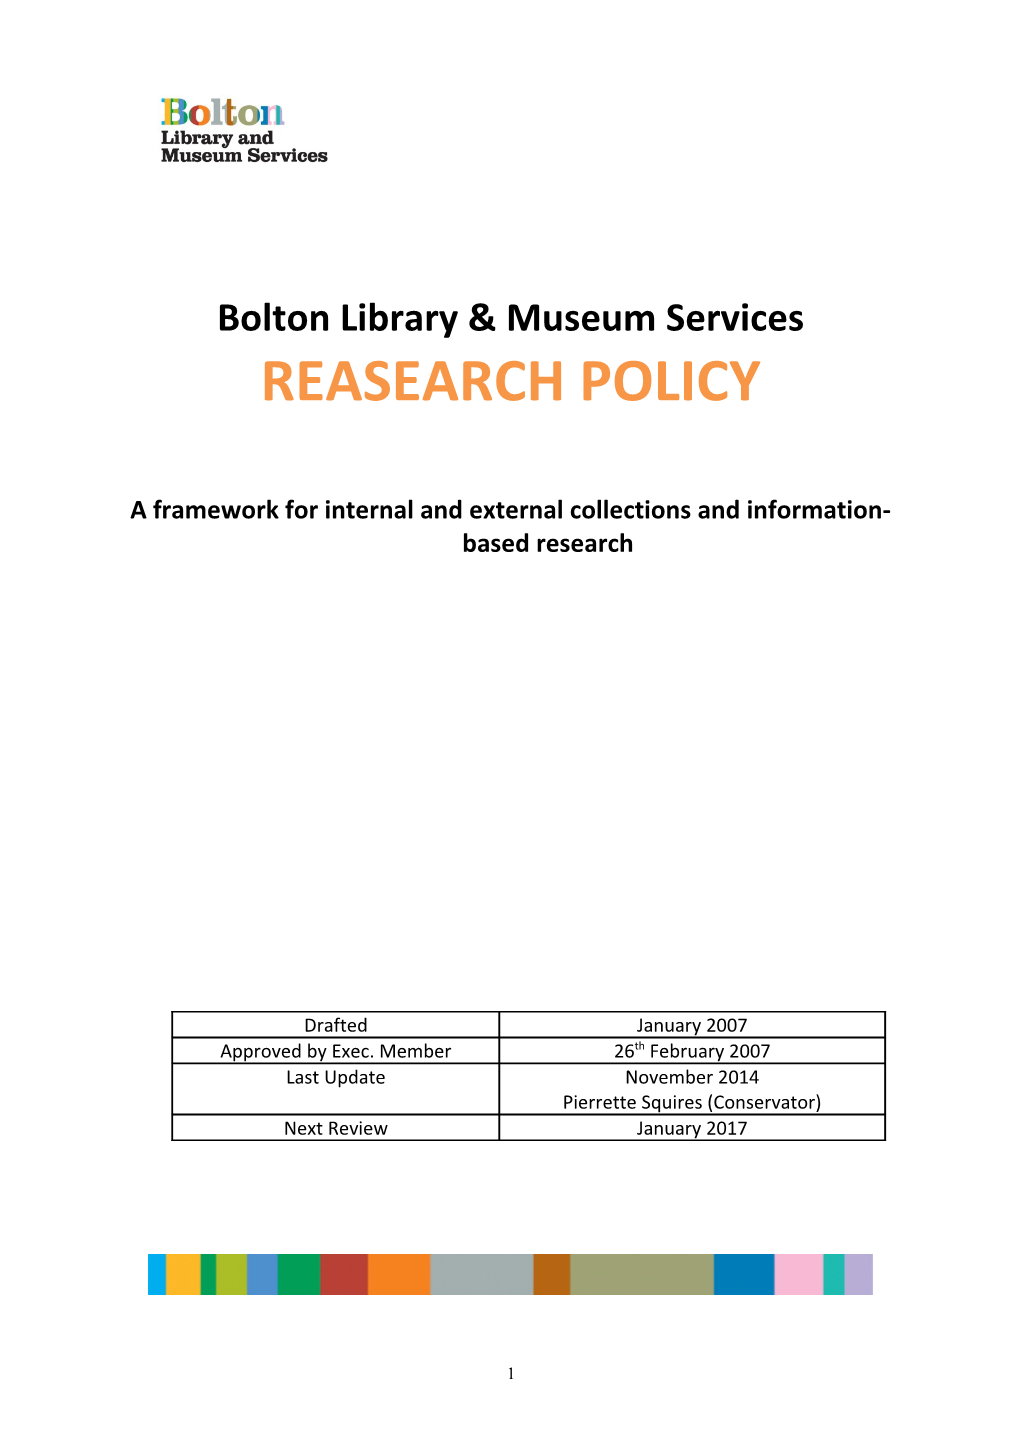 A Framework for Internal and External Collections and Information-Based Research